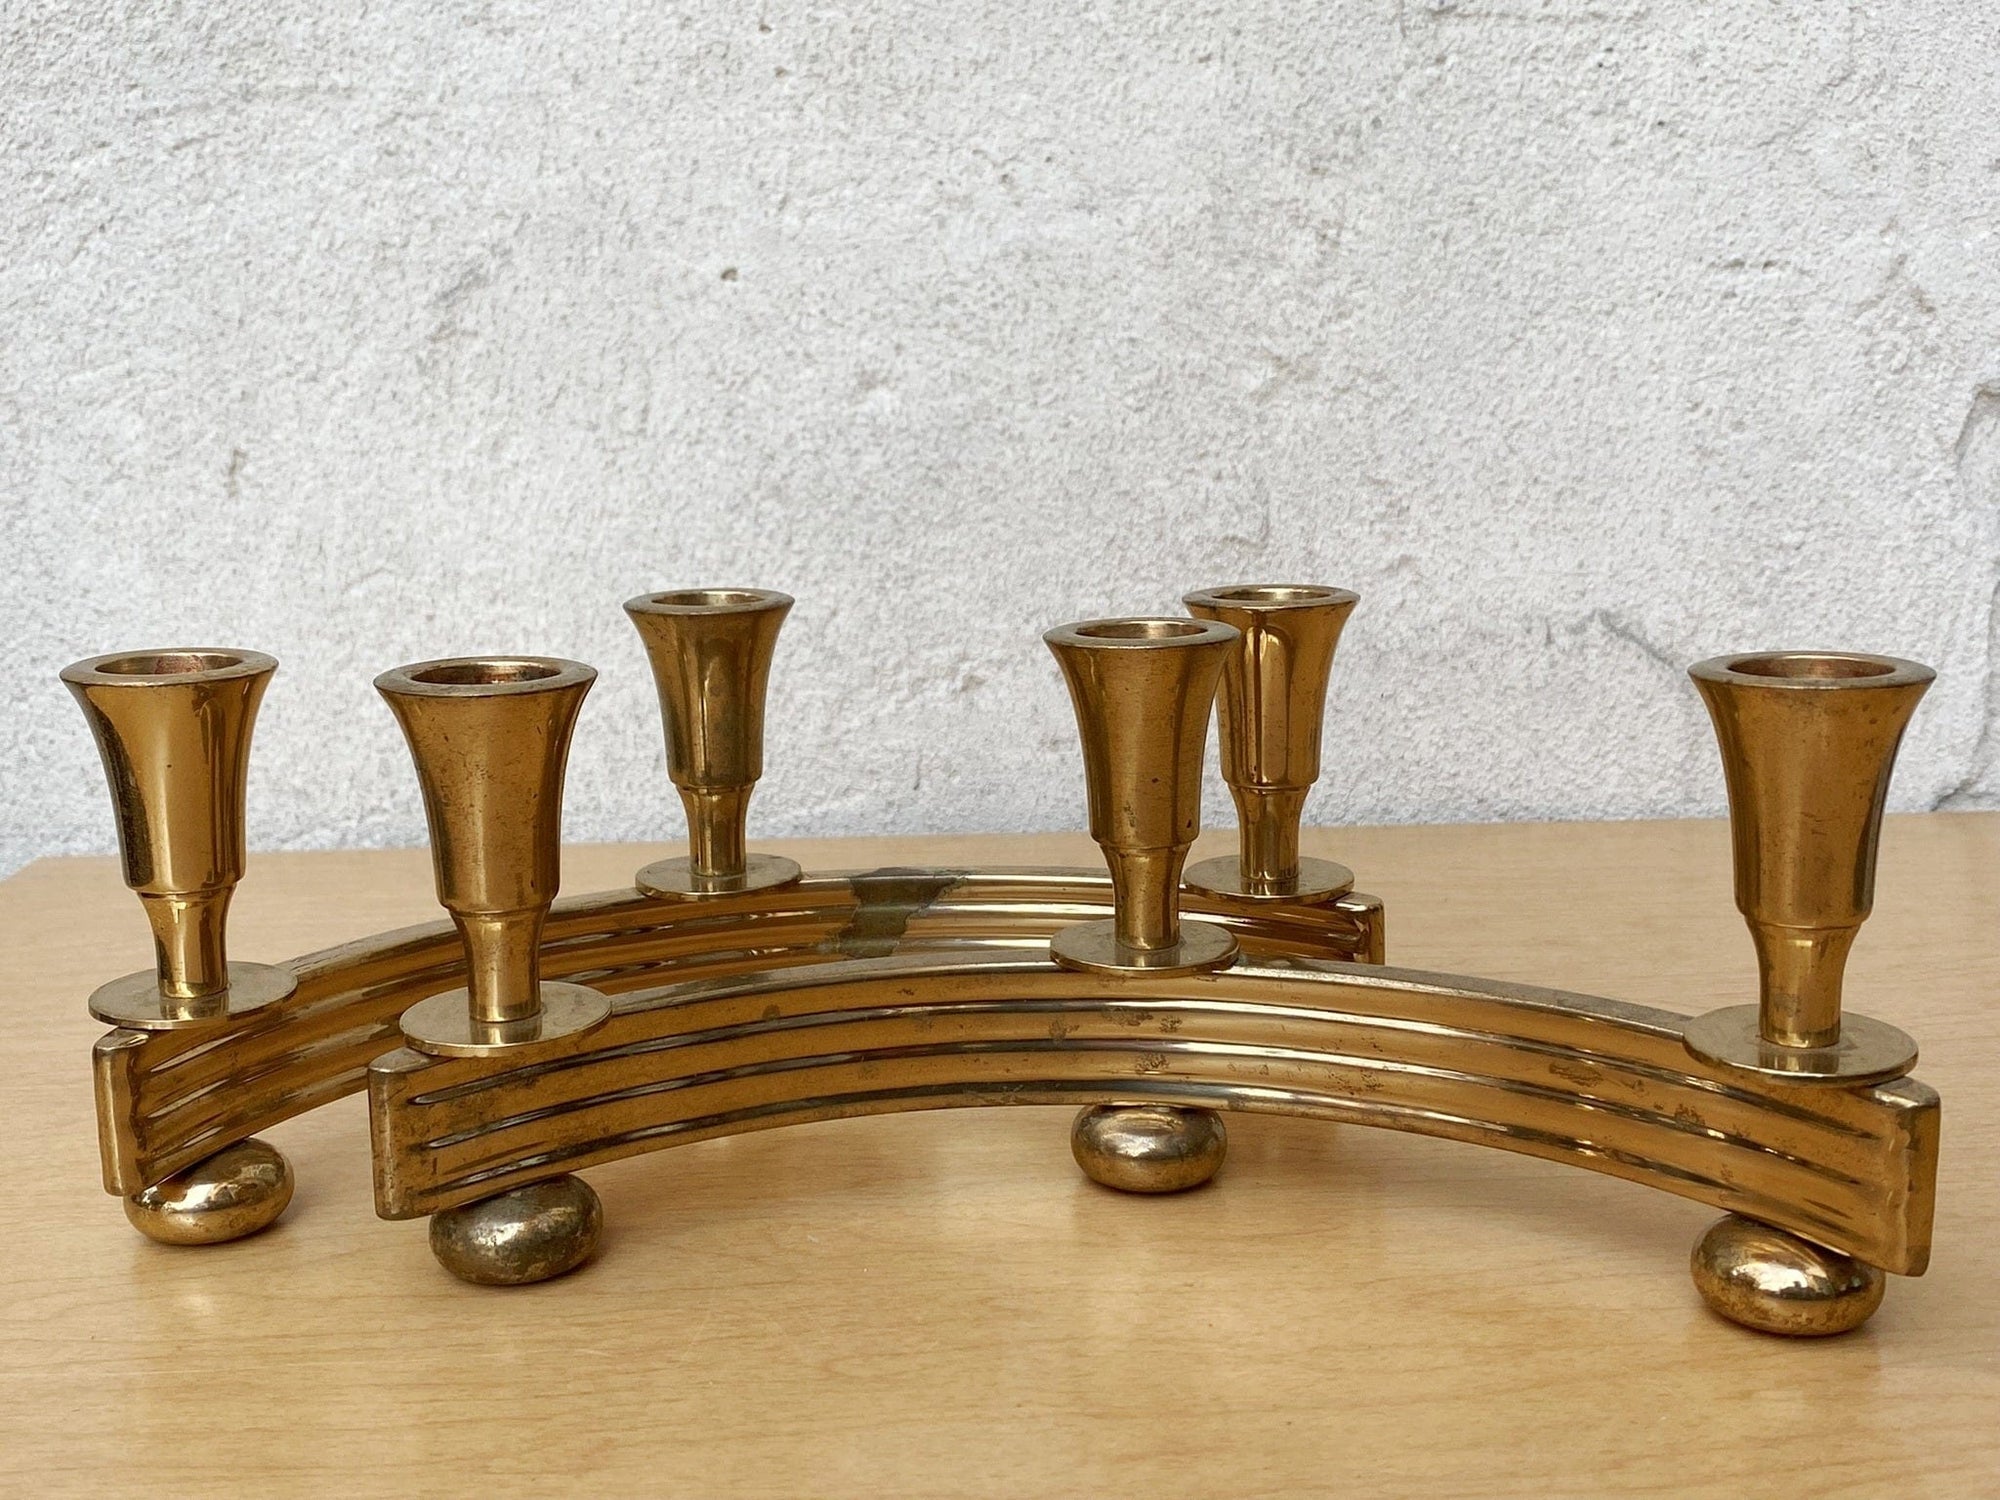 I Like Mike's Mid Century Modern candle holders Pair Brass Deco Candlelabra Candle Stick Holders by Dirilyte #2